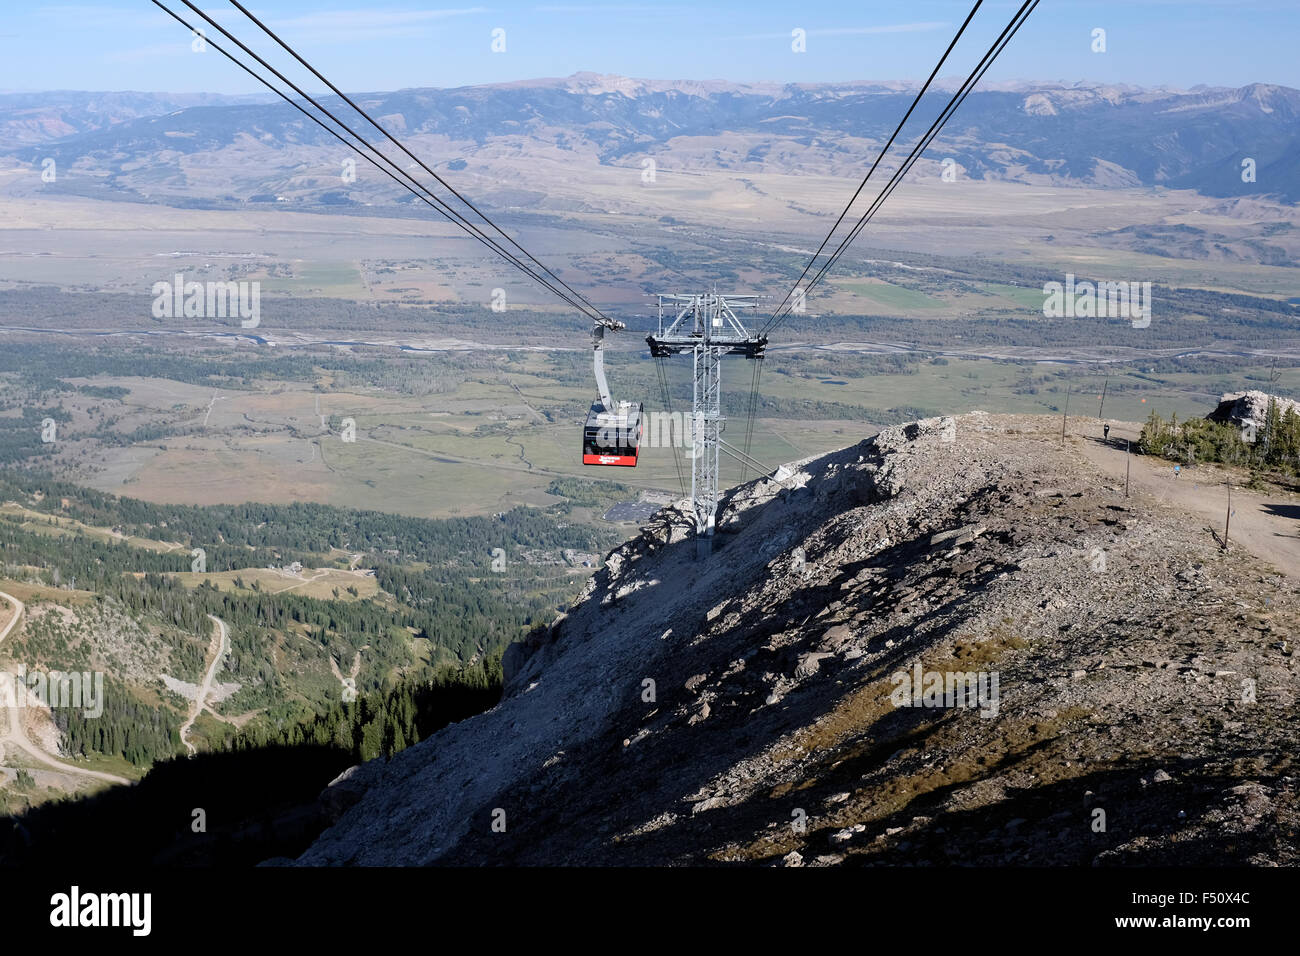 Jackson Hole Aerial Tram to top of Mount Rendezvous in Grand Tetons National Park, Jackson Hole, Wyoming Stock Photo